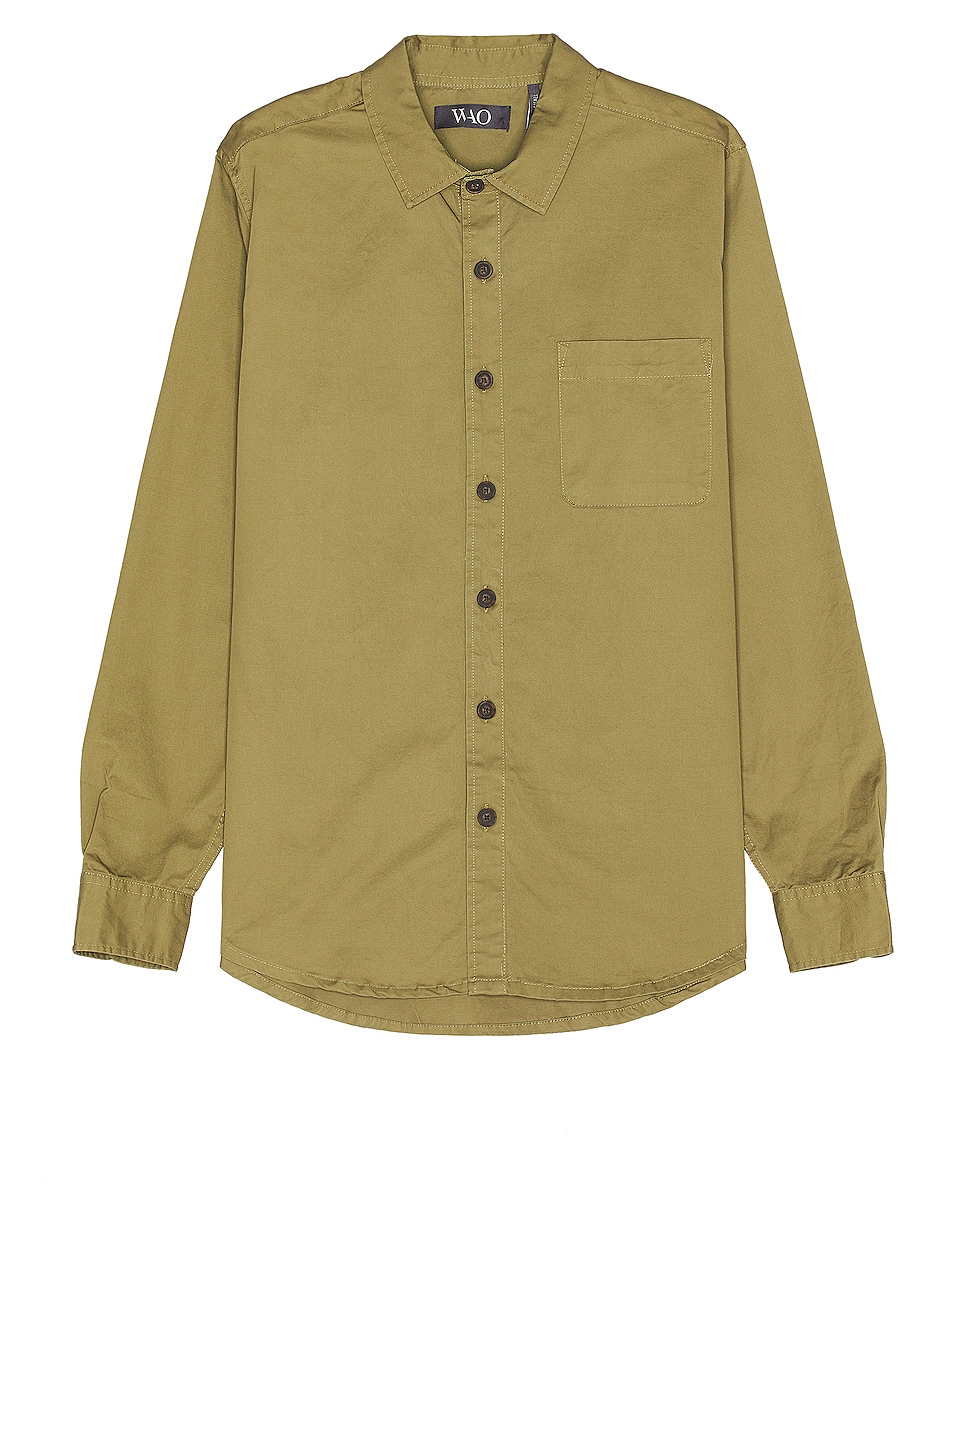 Long Sleeve Twill Shirt in Olive